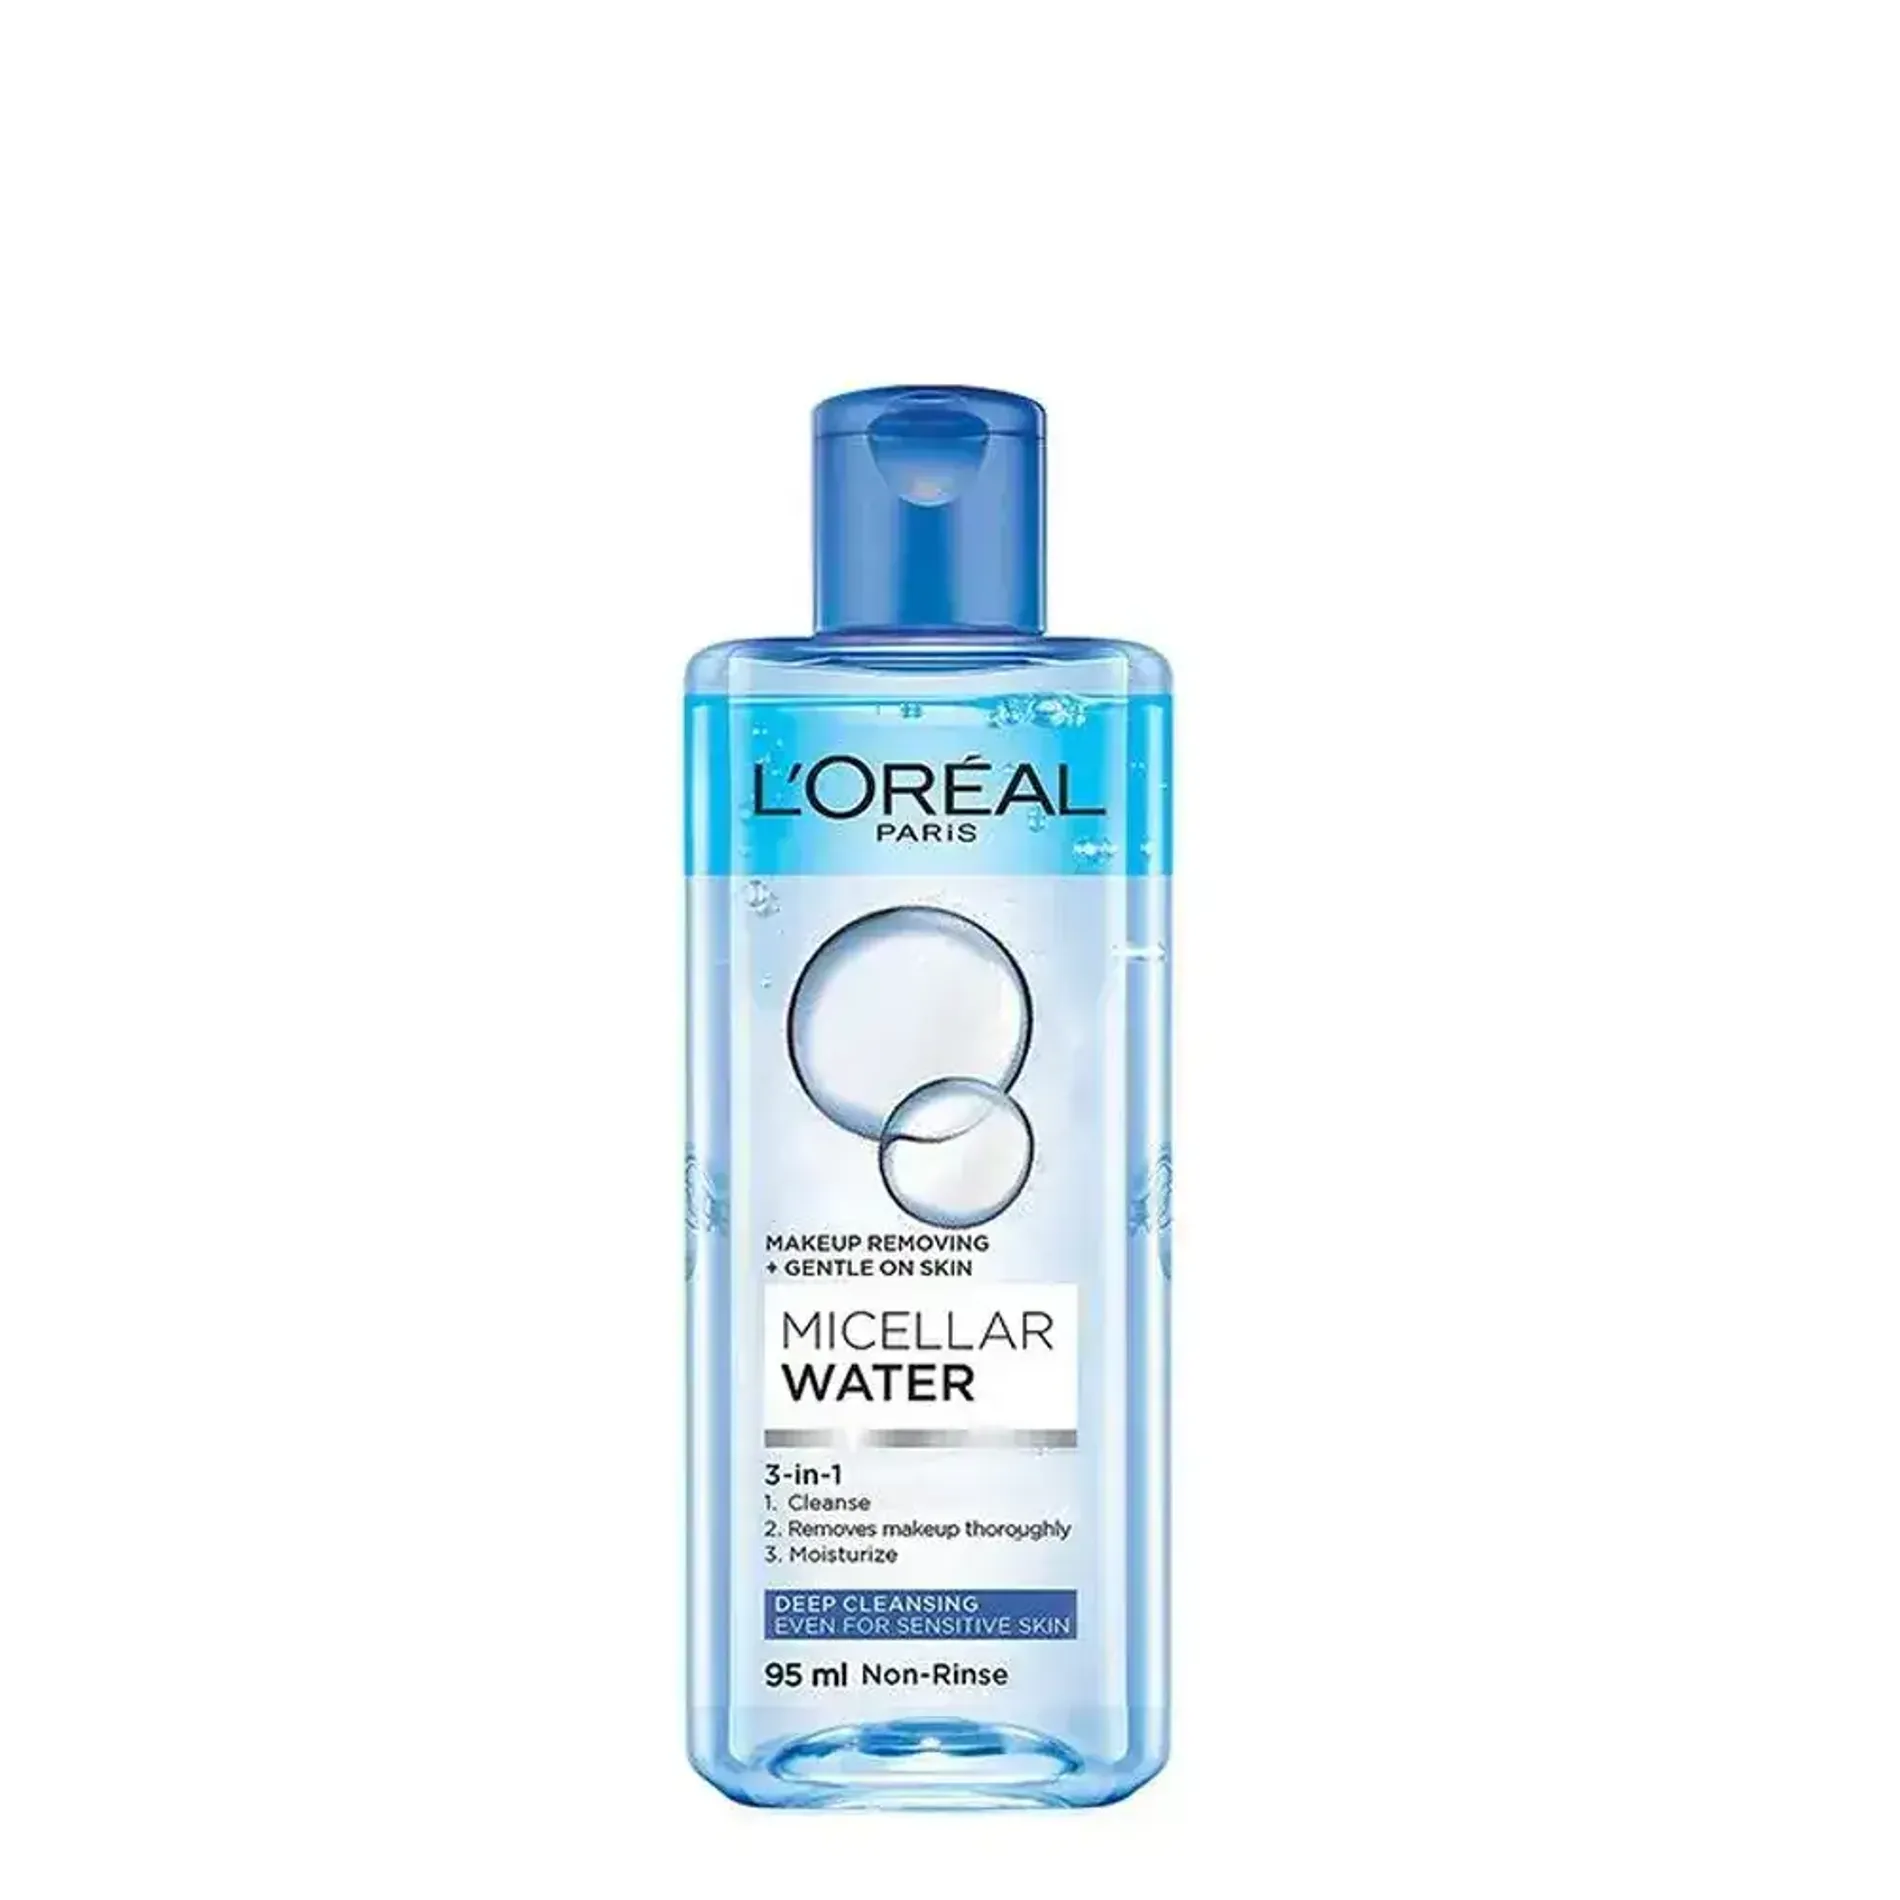 nuoc-tay-trang-sach-sau-l-oreal-micellar-water-deep-cleansing-even-for-sensitive-skin-3